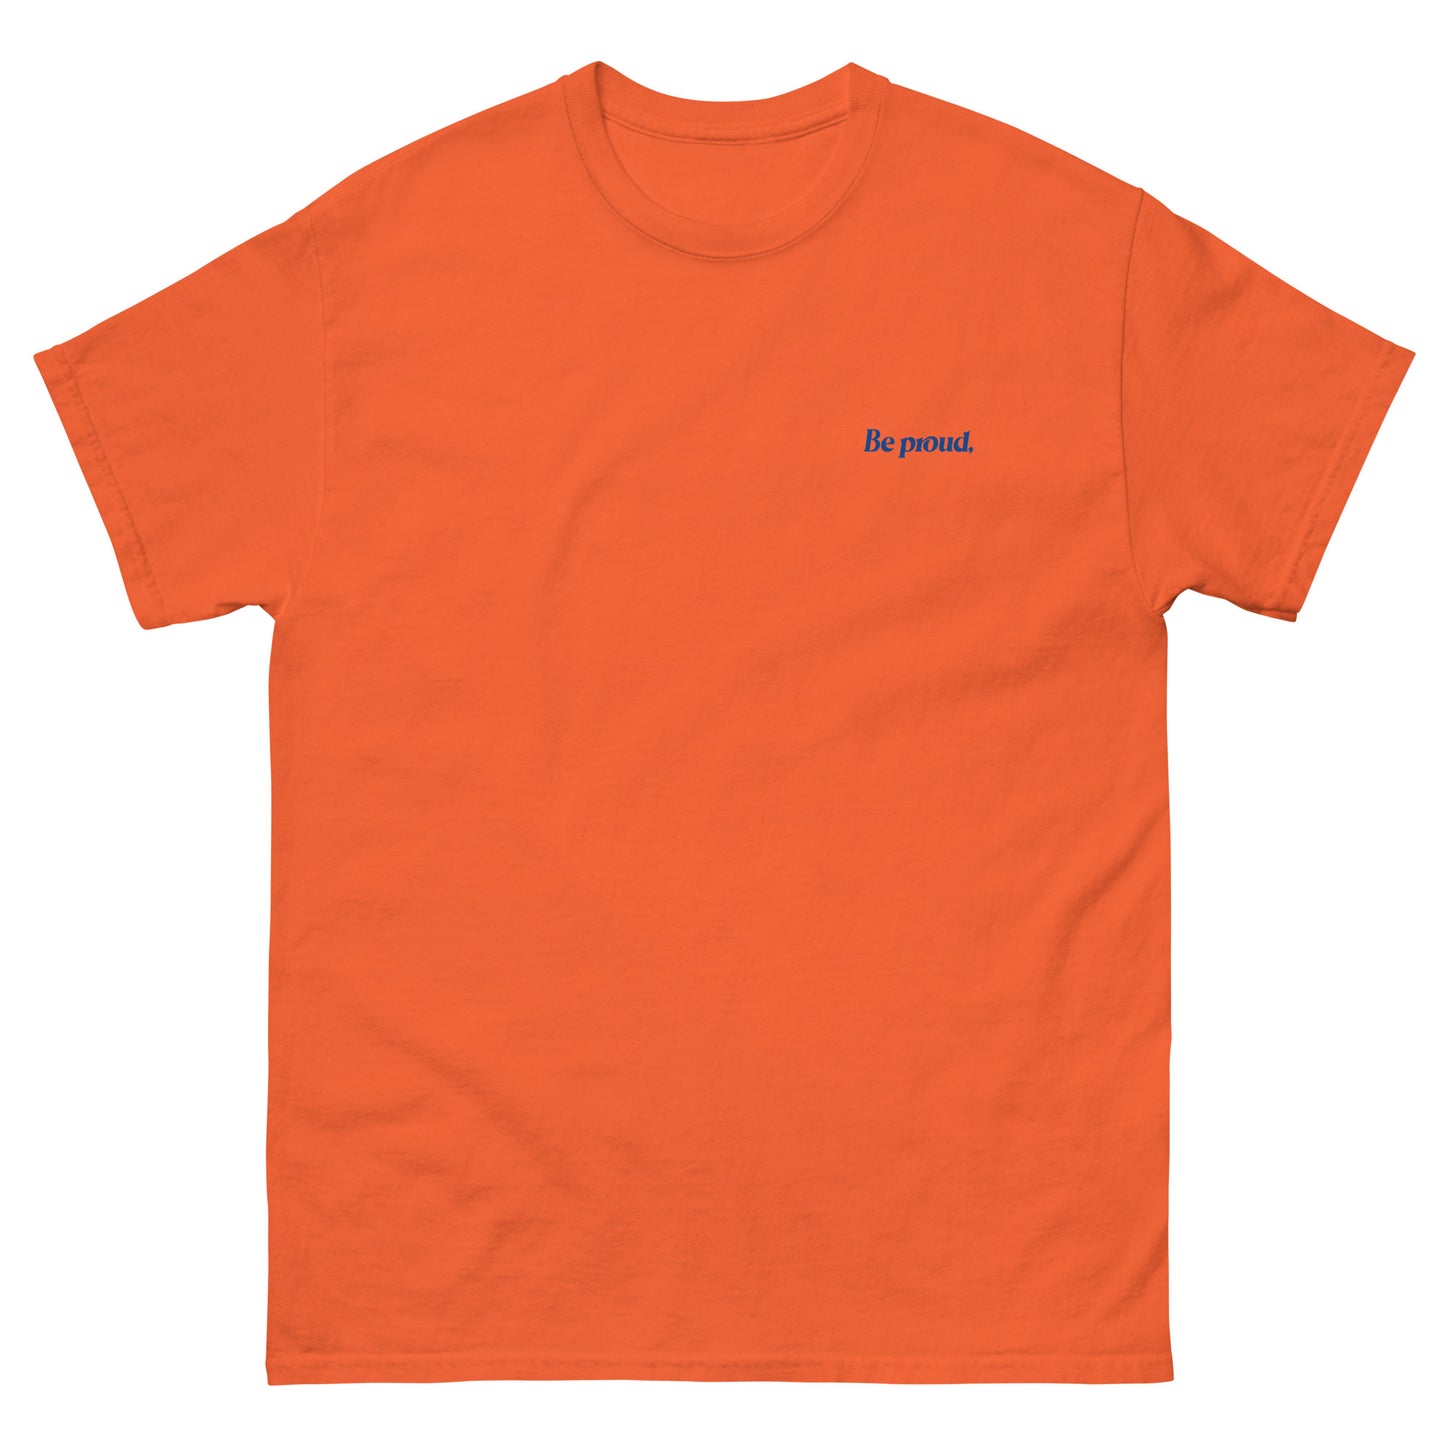 Orange High Quality Tee - Front Design with "Be proud, " print on left chest - Back Design with a Phrase "Be proud, you survived the days you thought you couldn't." print